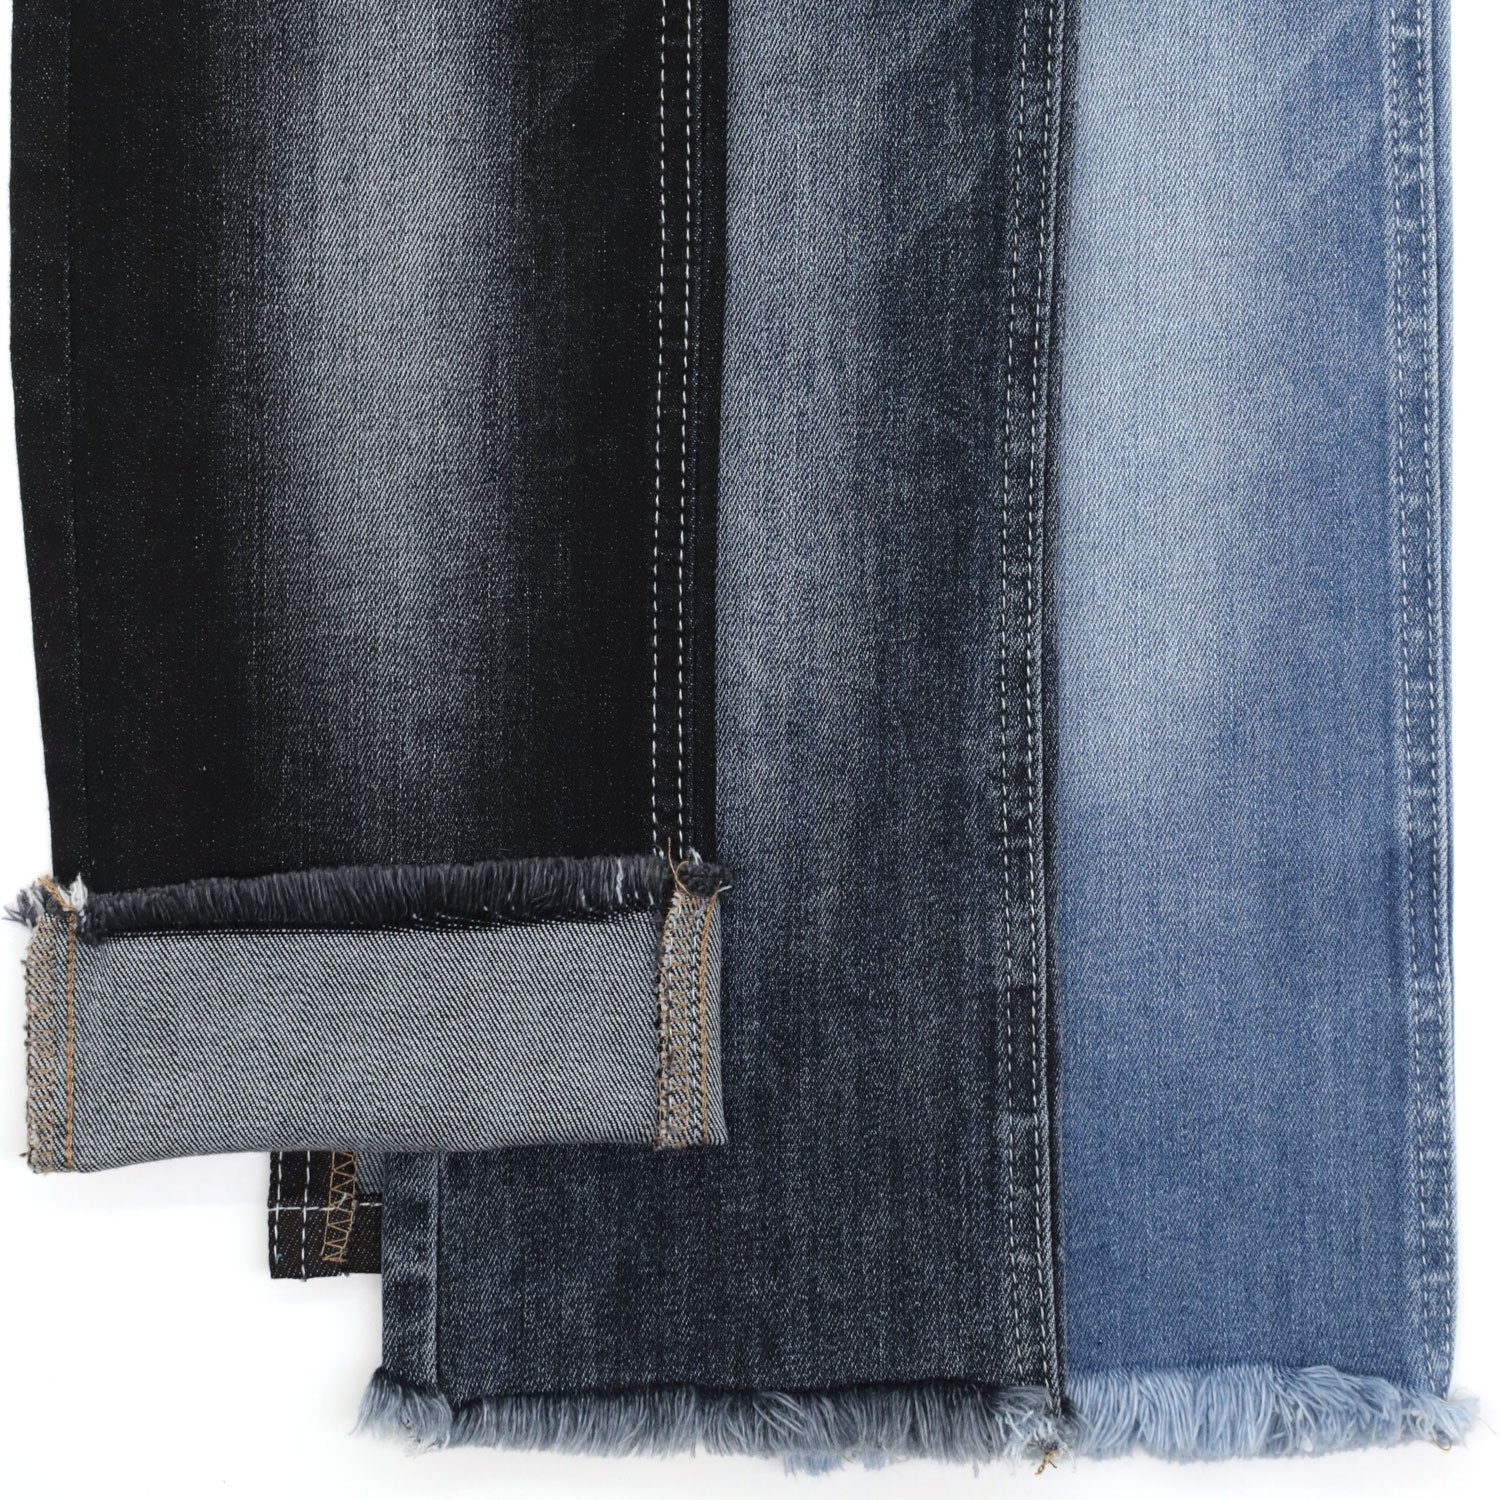 A Simple Way to Have the Best Denim Fabric for Jean Options 1